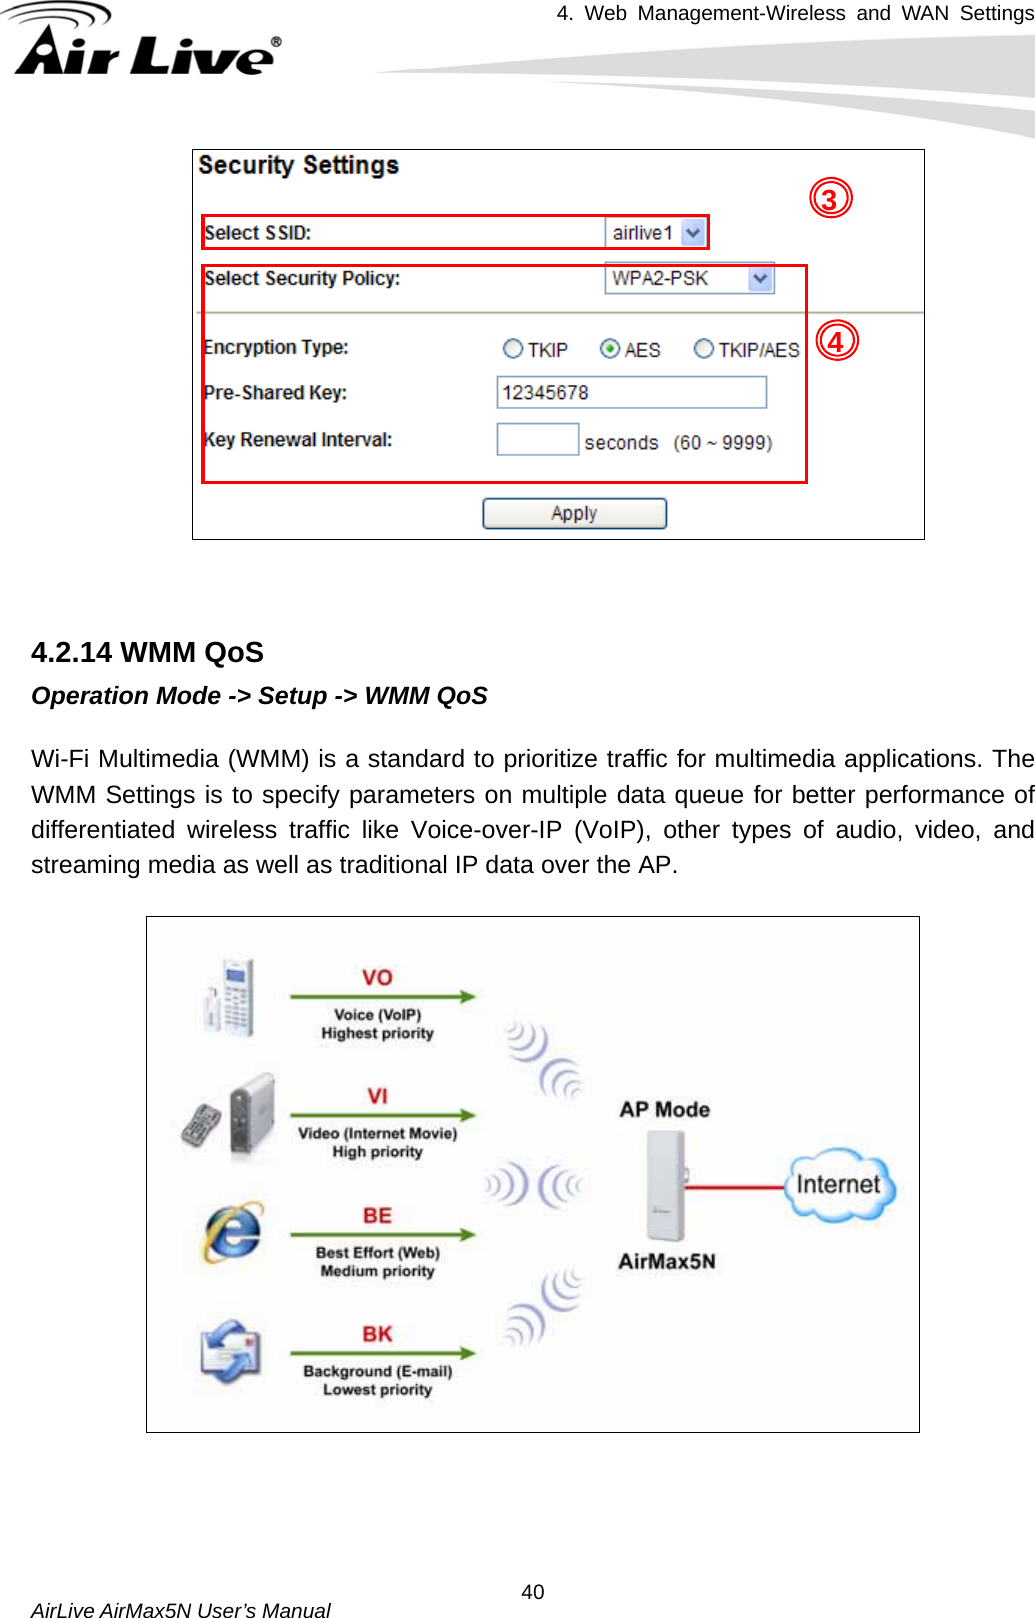 4. Web Management-Wireless and WAN Settings   AirLive AirMax5N User’s Manual  40 3 4   4.2.14 WMM QoS Operation Mode -&gt; Setup -&gt; WMM QoS  Wi-Fi Multimedia (WMM) is a standard to prioritize traffic for multimedia applications. The WMM Settings is to specify parameters on multiple data queue for better performance of differentiated wireless traffic like Voice-over-IP (VoIP), other types of audio, video, and streaming media as well as traditional IP data over the AP.       